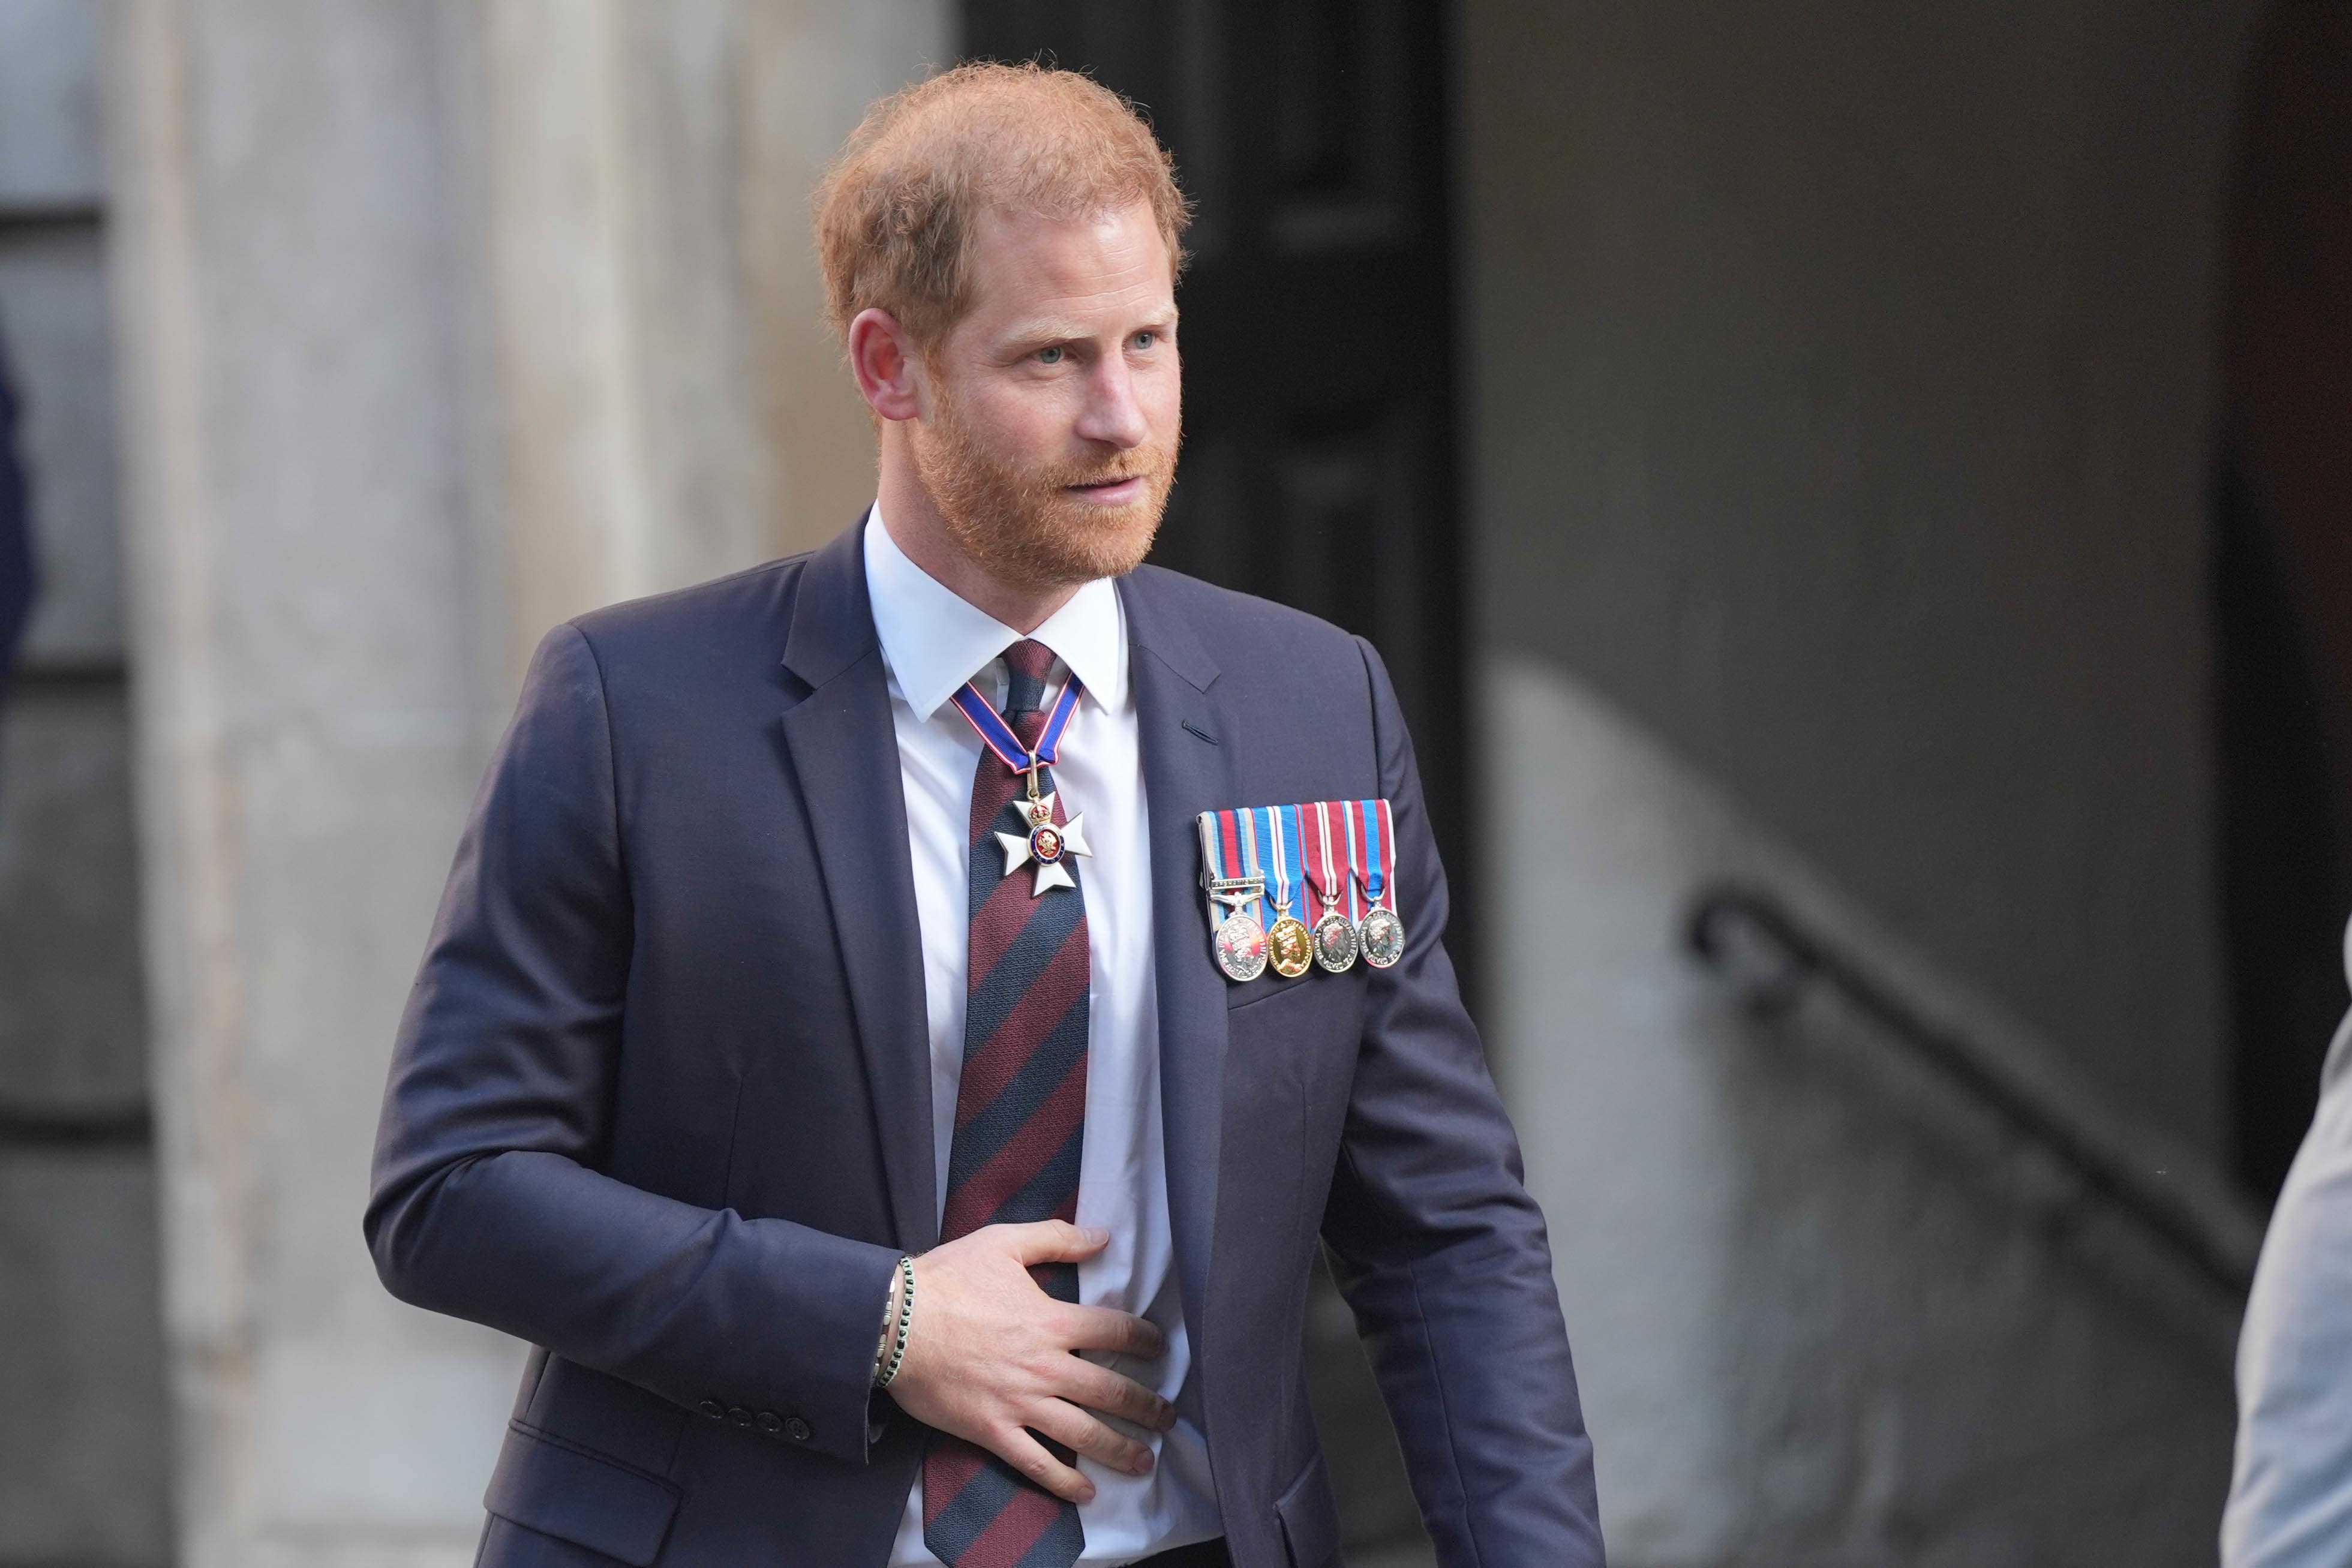 The Duke of Sussex is bringing a High Court claim against News Group Newspapers over allegations of unlawful information gathering (Yui Mok/PA)